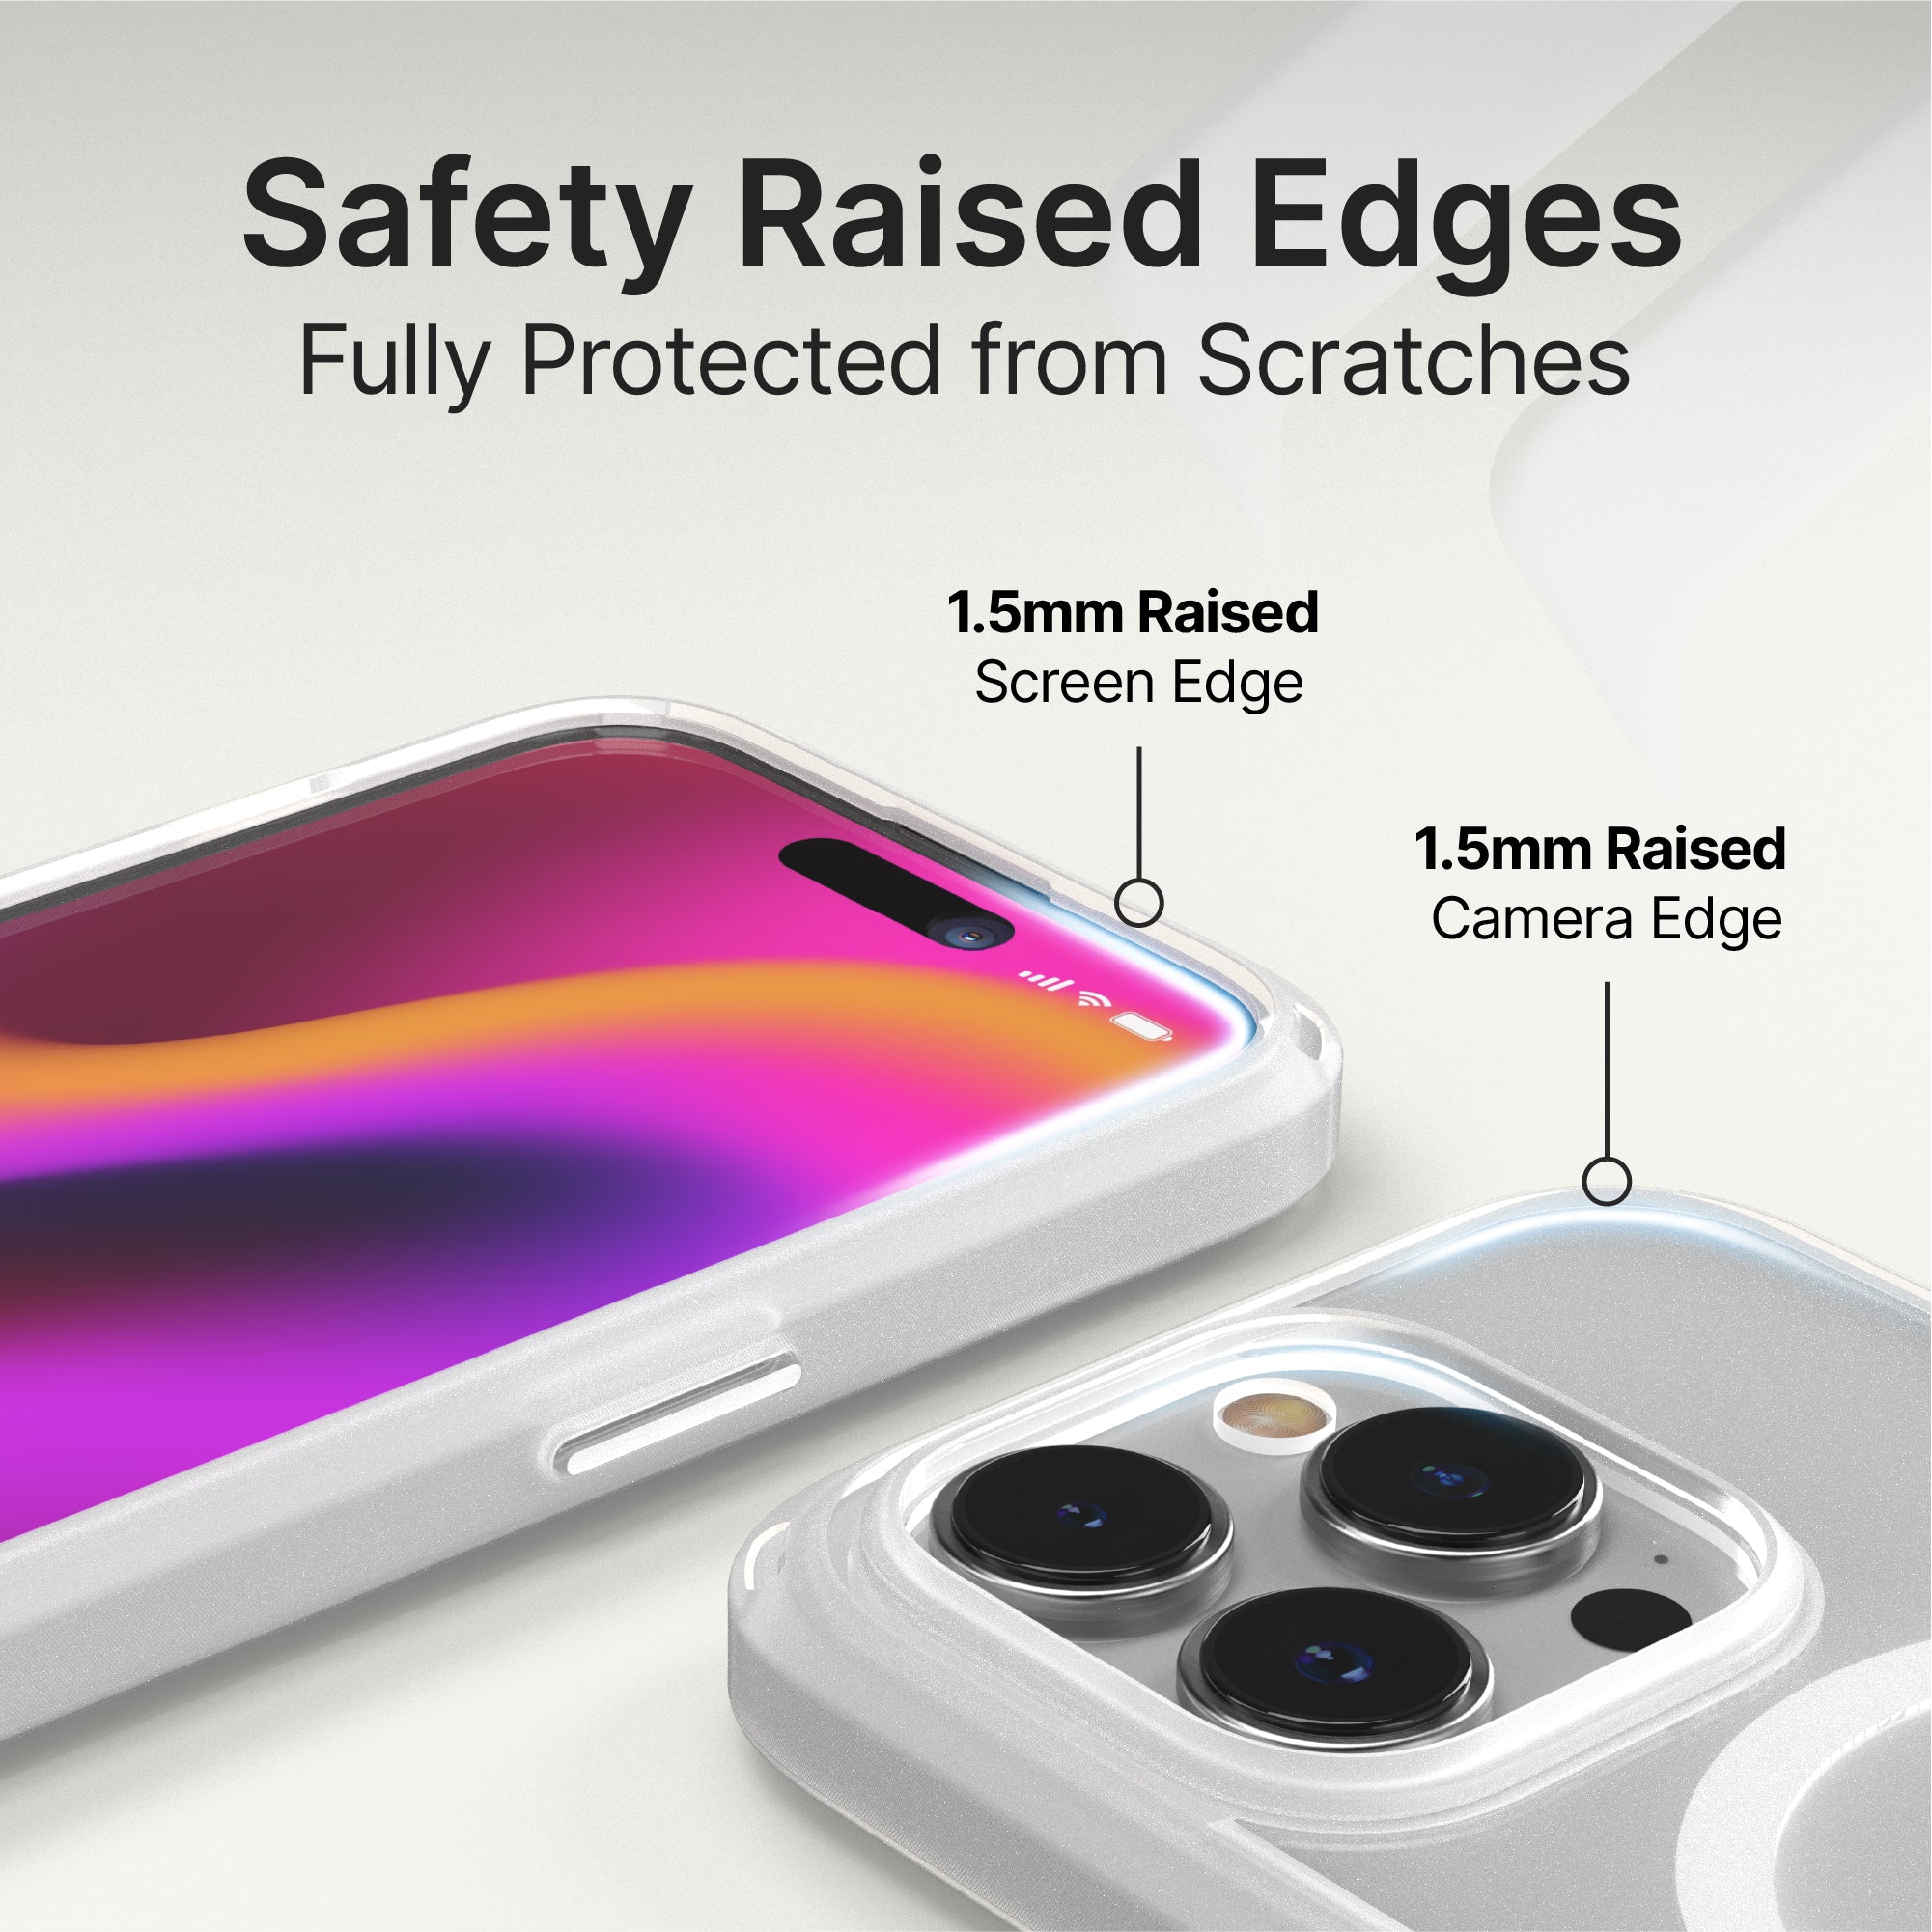 catalyst iphone 15 series influence case magsafe compatible clear for iphone 15 pro showing the safety raised edges for camera and screen text reads safety raised edges fully protected from scratches 1.5mm raised screen edge 1.5mm raised camera edge